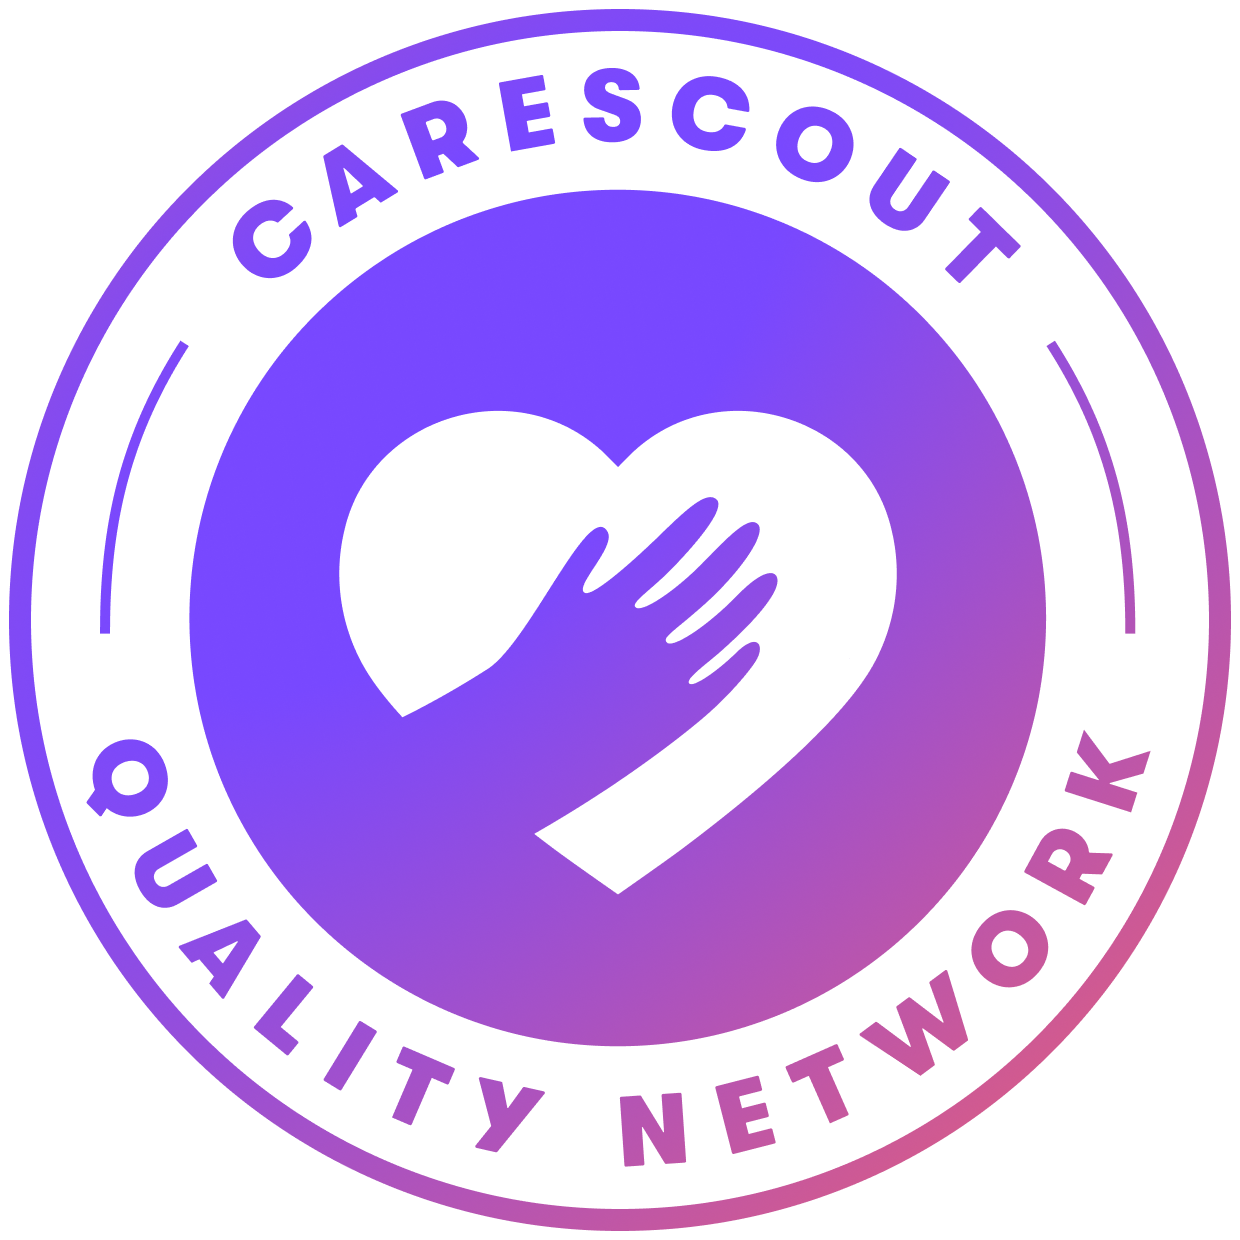 carescout quality network badge gradient